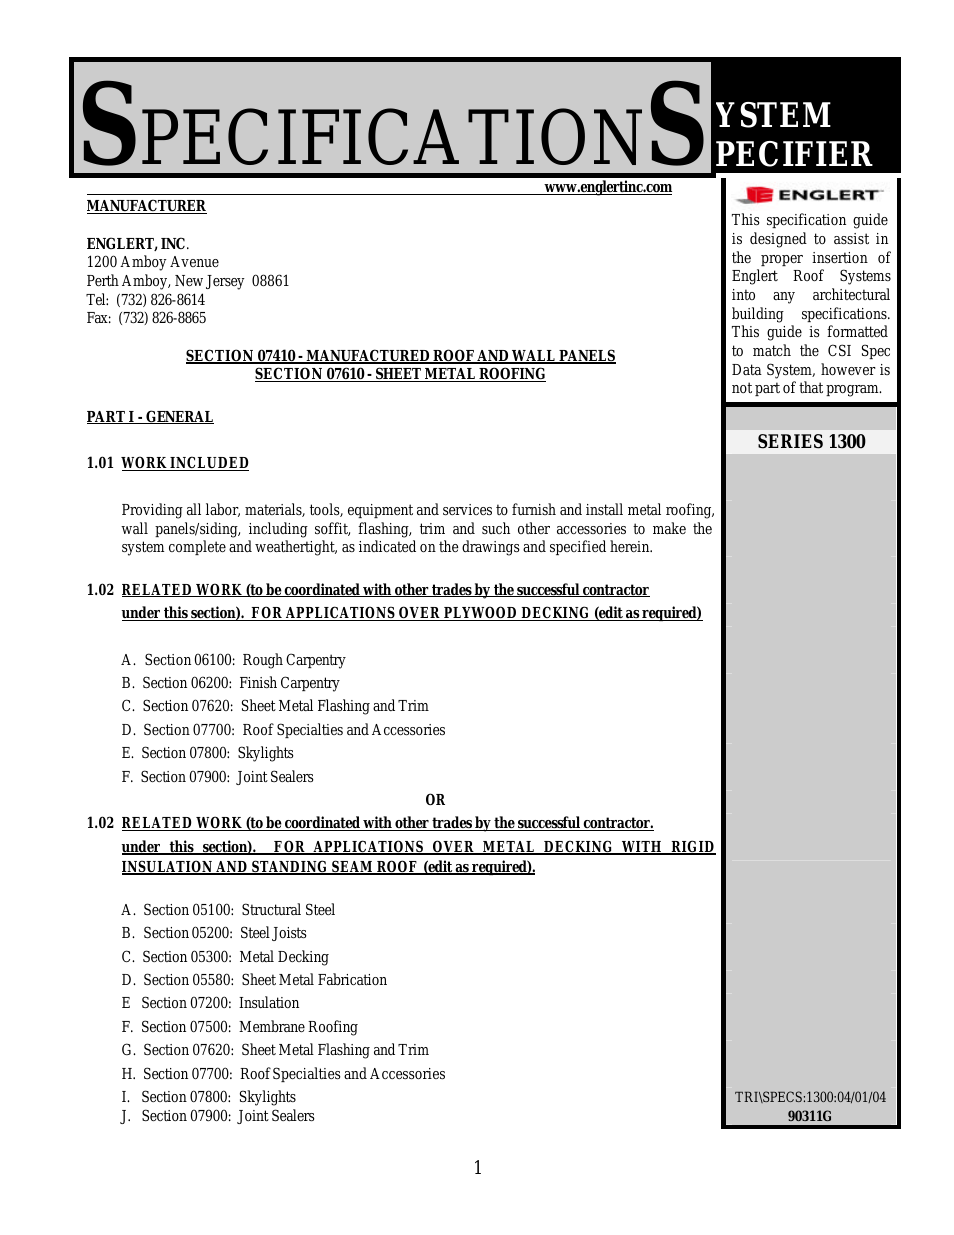 A1301 Specifier Sheets